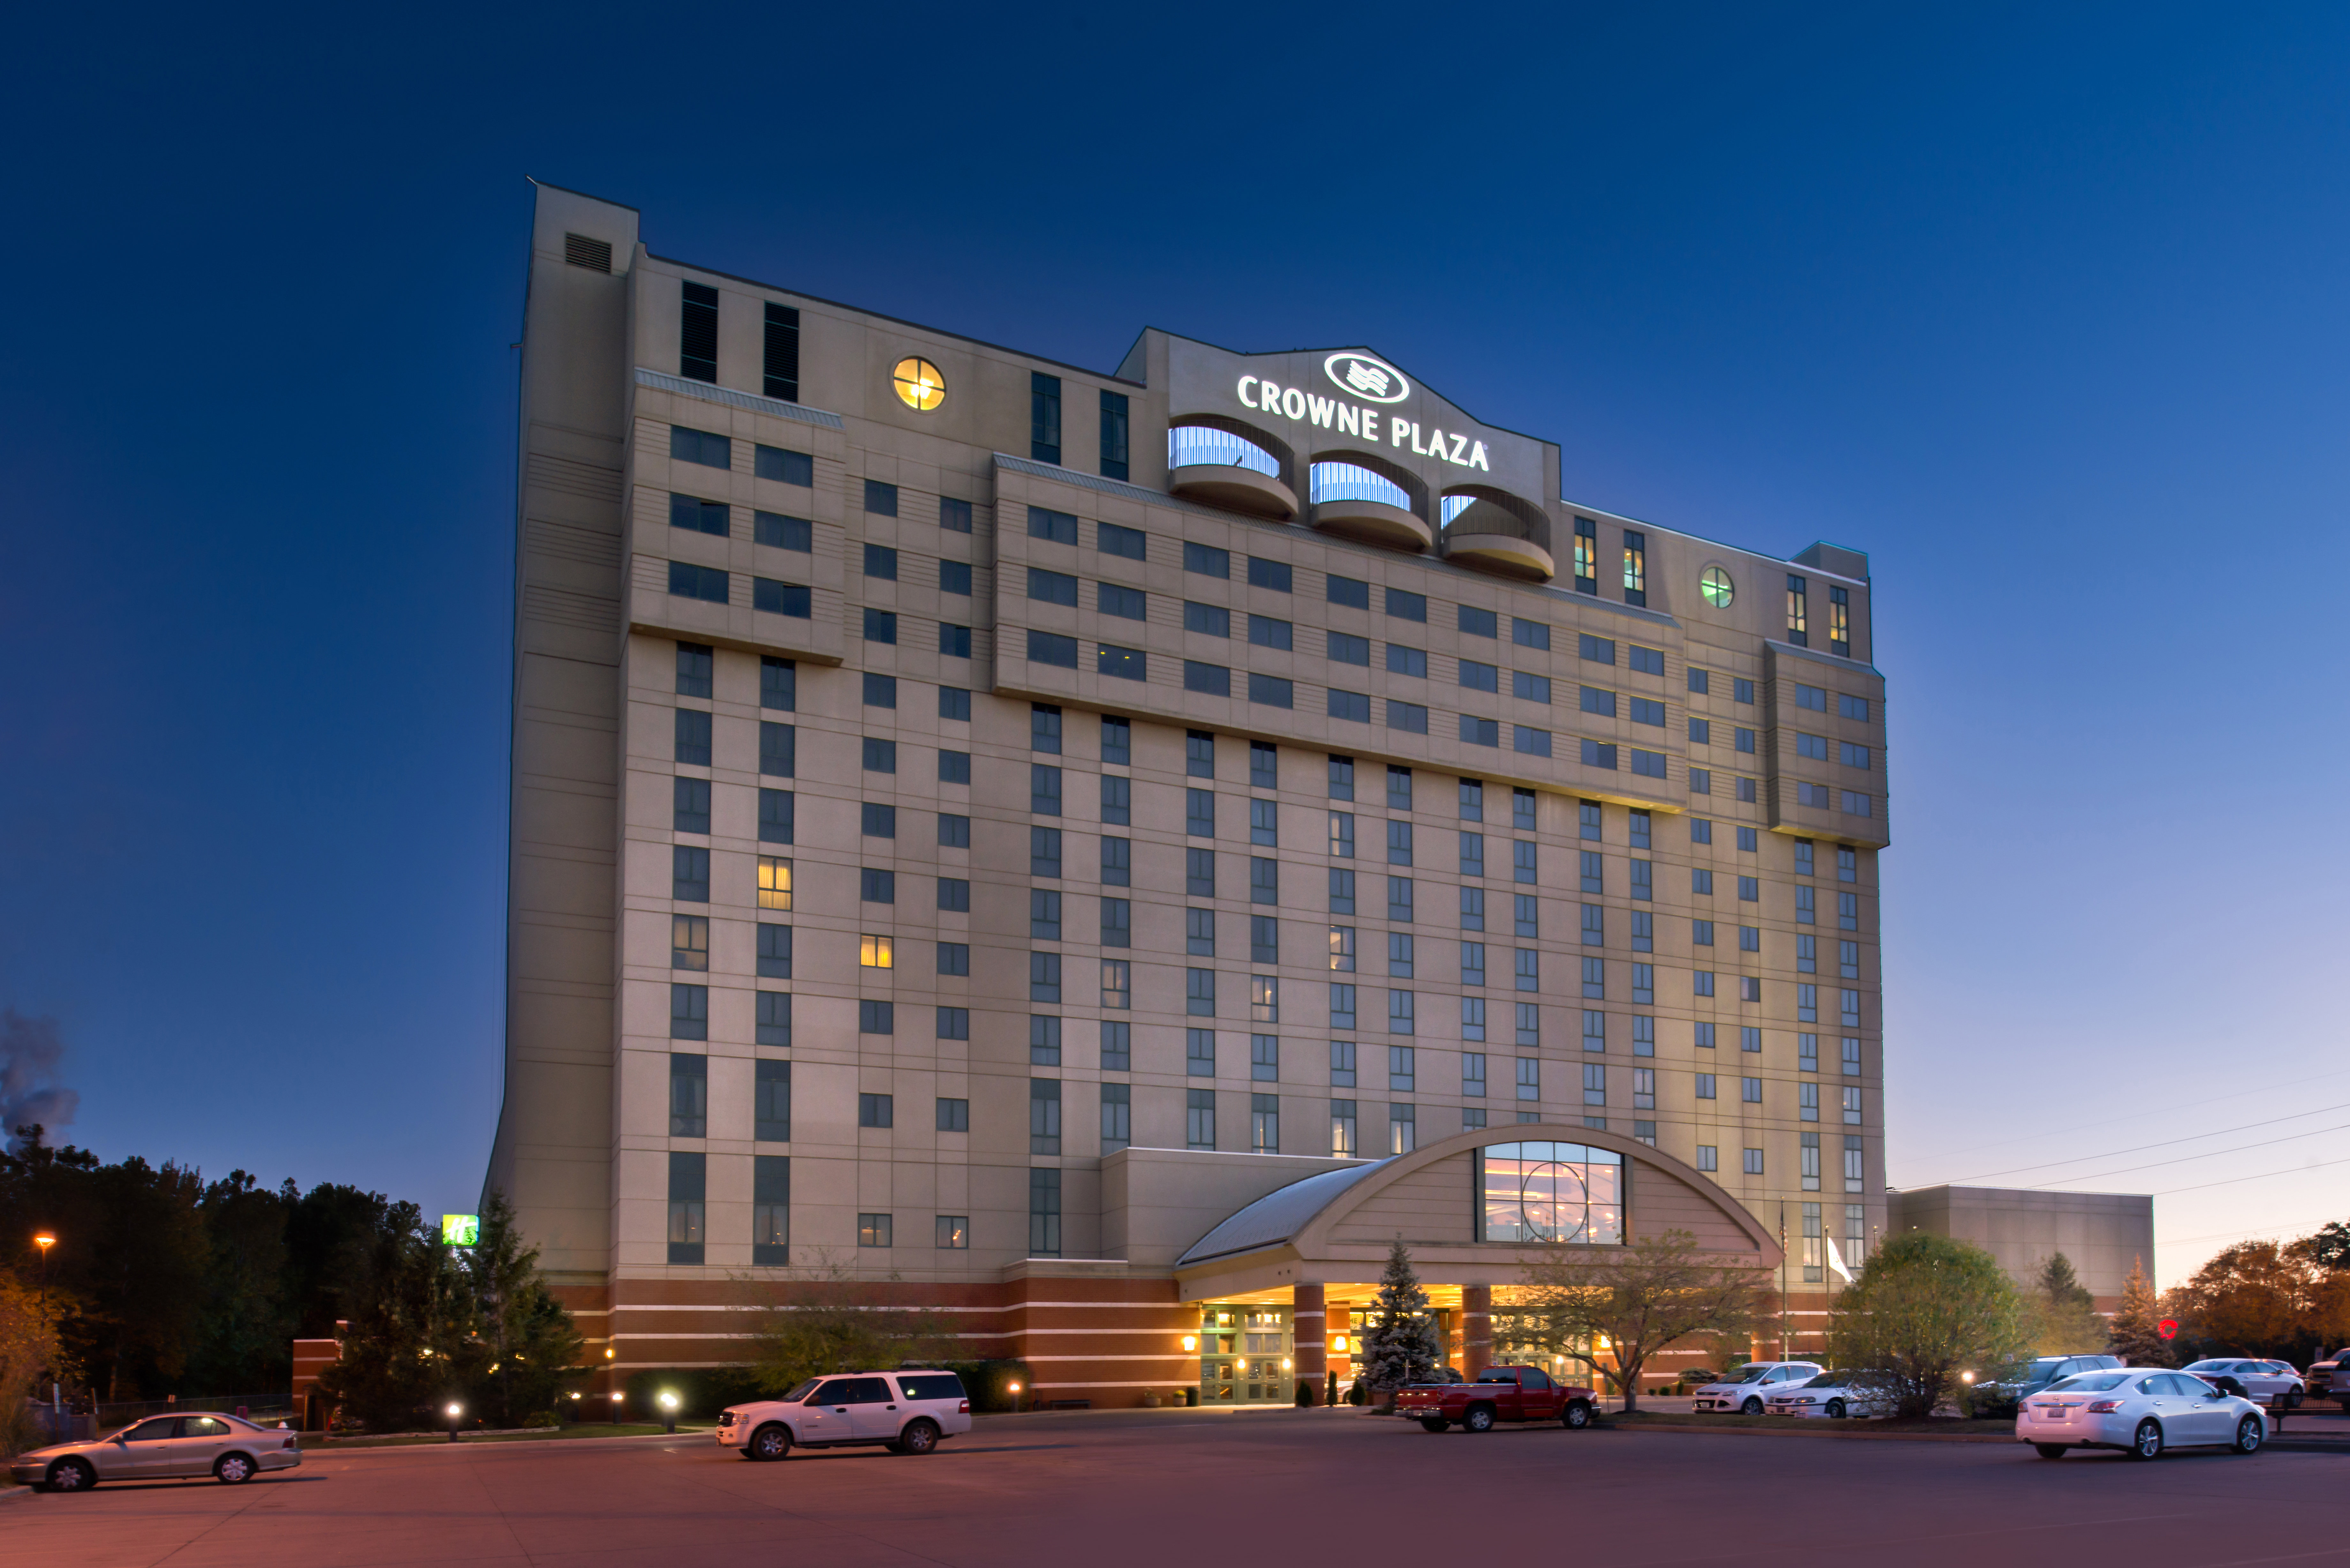 Crowne Plaza is located within minutes of Knight's Action Park.